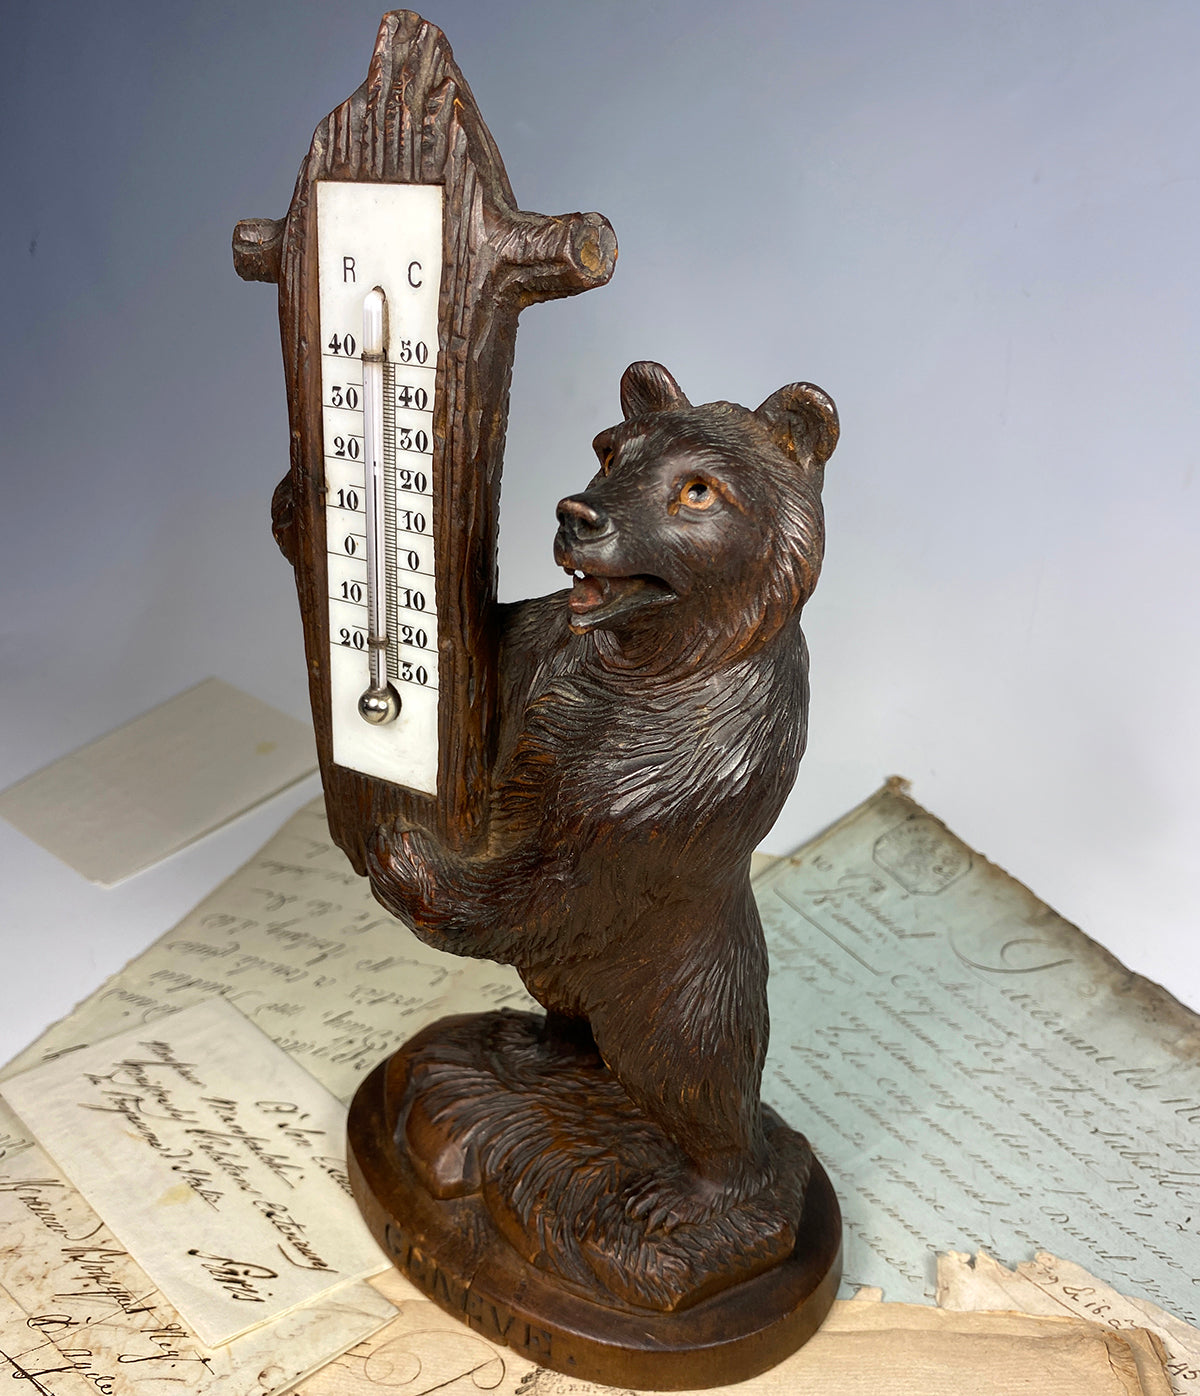 Antique Swiss HC Black Forest 10.5" Bear Thermometer Stand, Desktop Weather, Glass Eyes